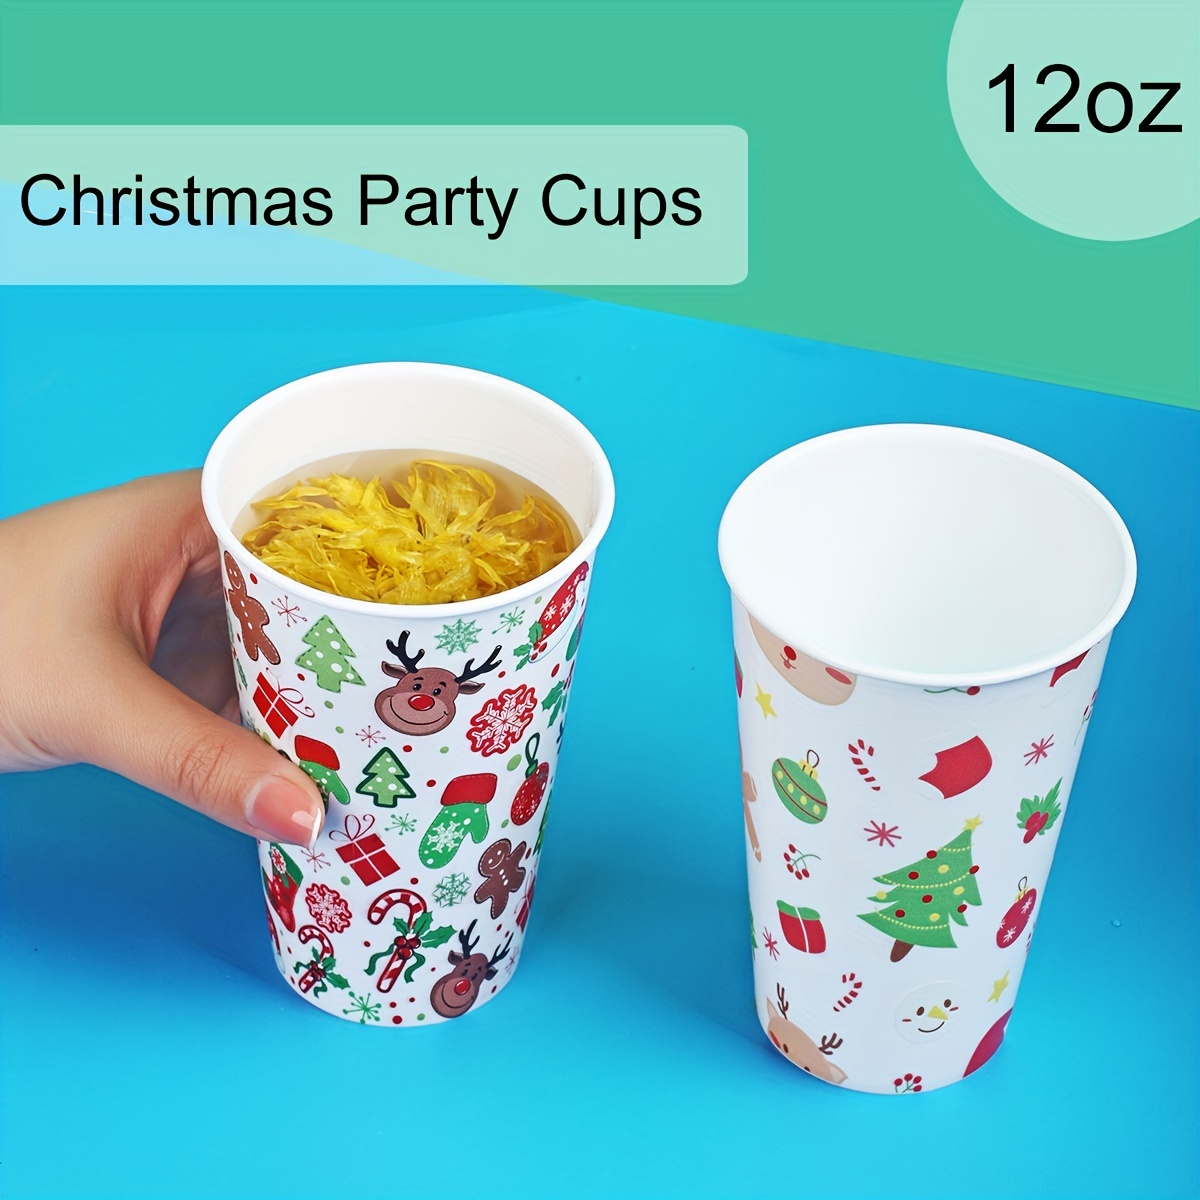 Christmas Party Cups, Reusable Christmas Party Cups, Christmas